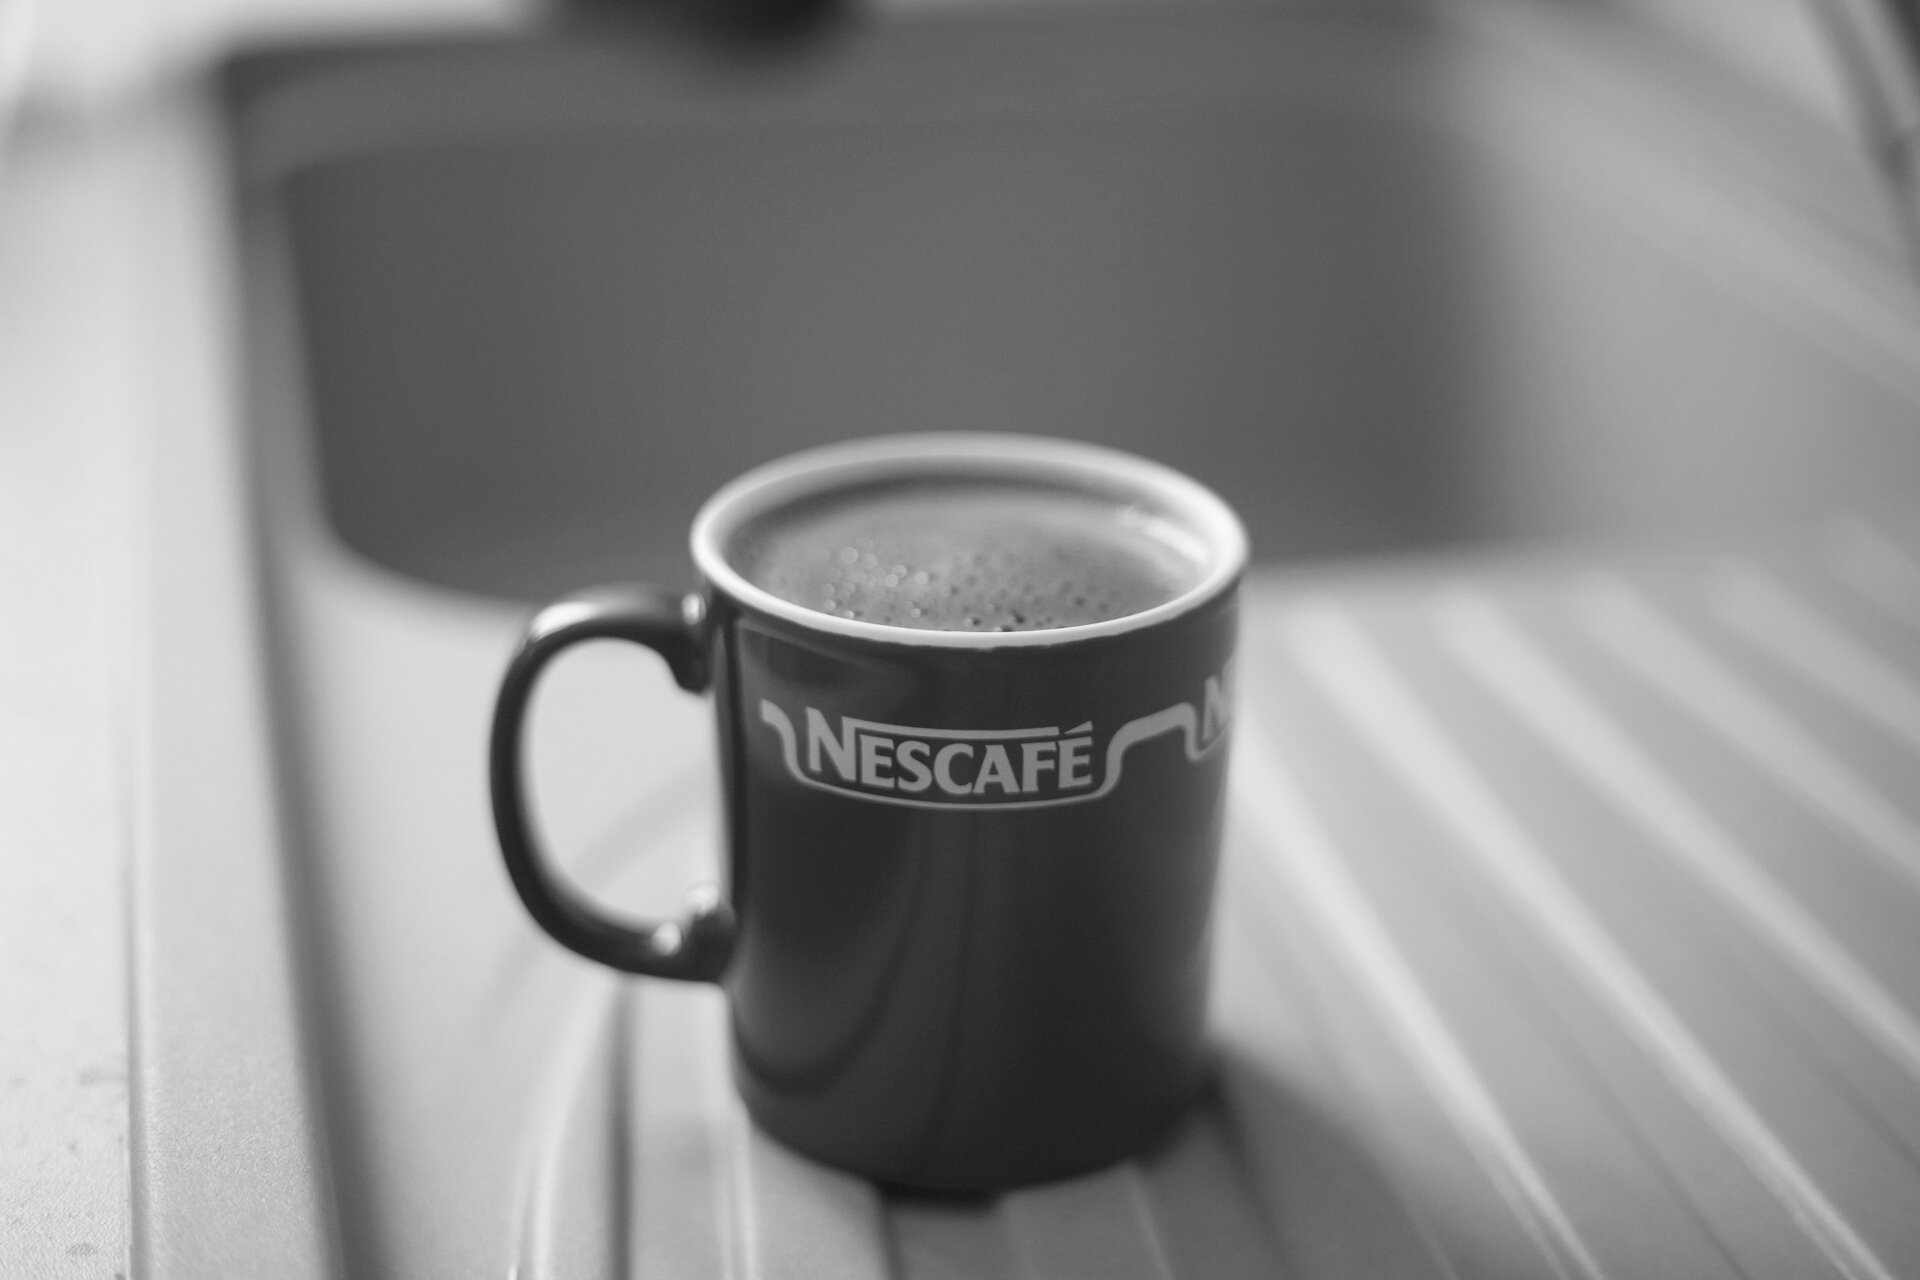 A Nescafe cup sits on a kitchen counter